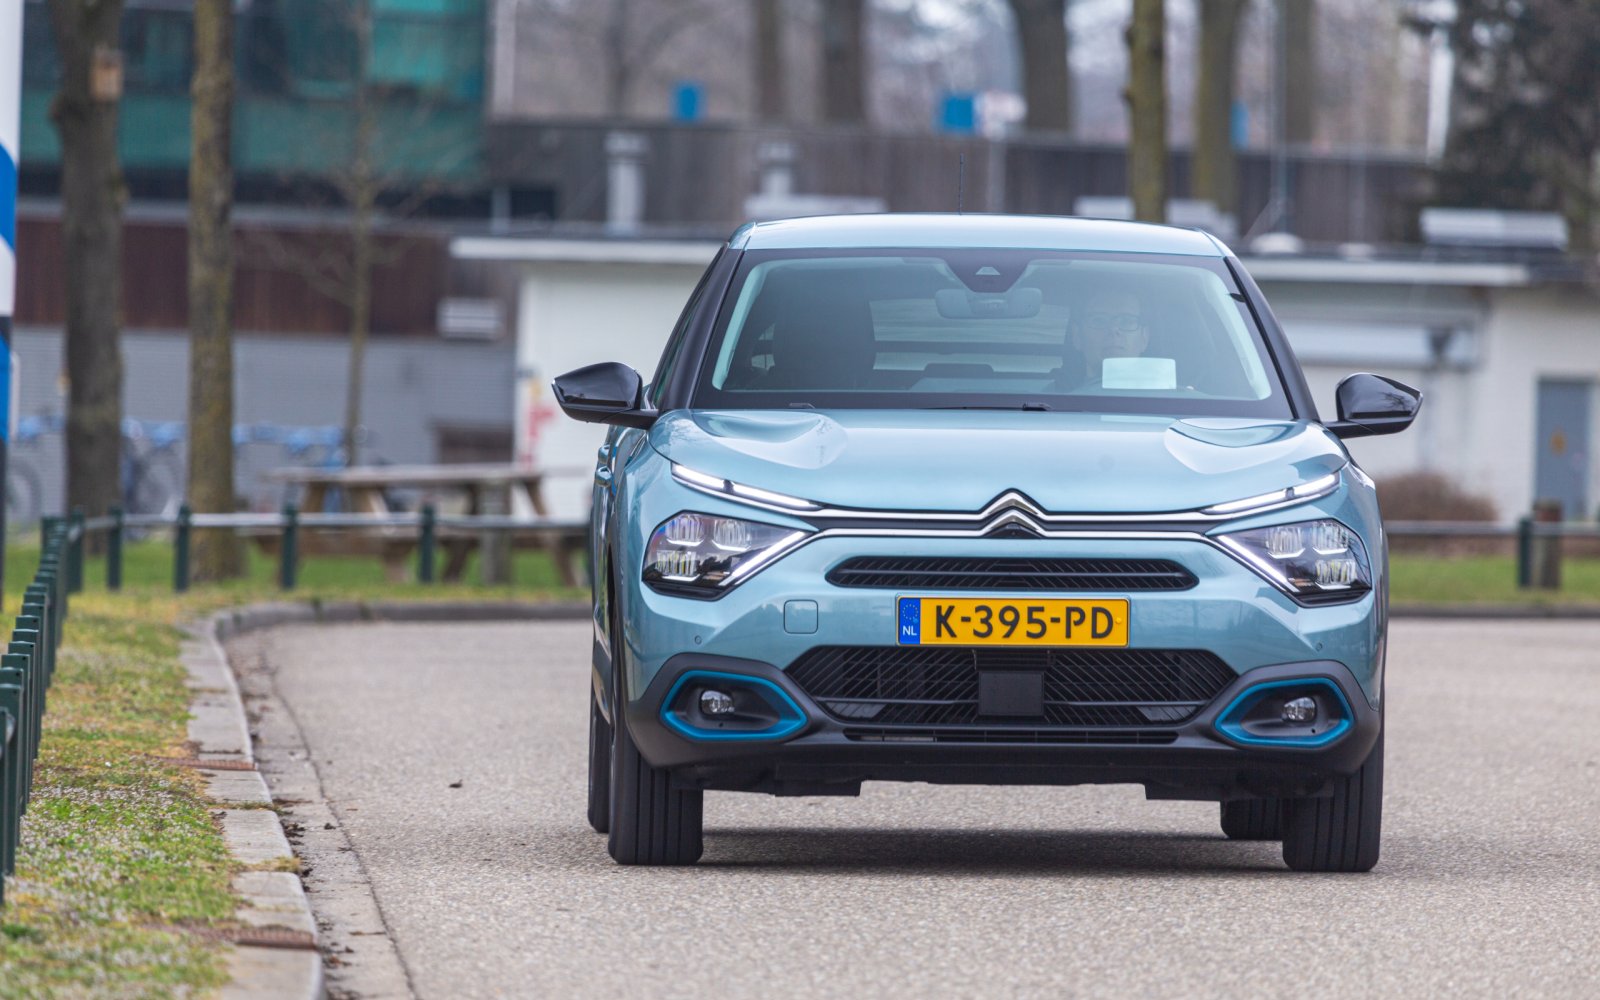 Three advantages and three disadvantages of the electric Citroën e-C4